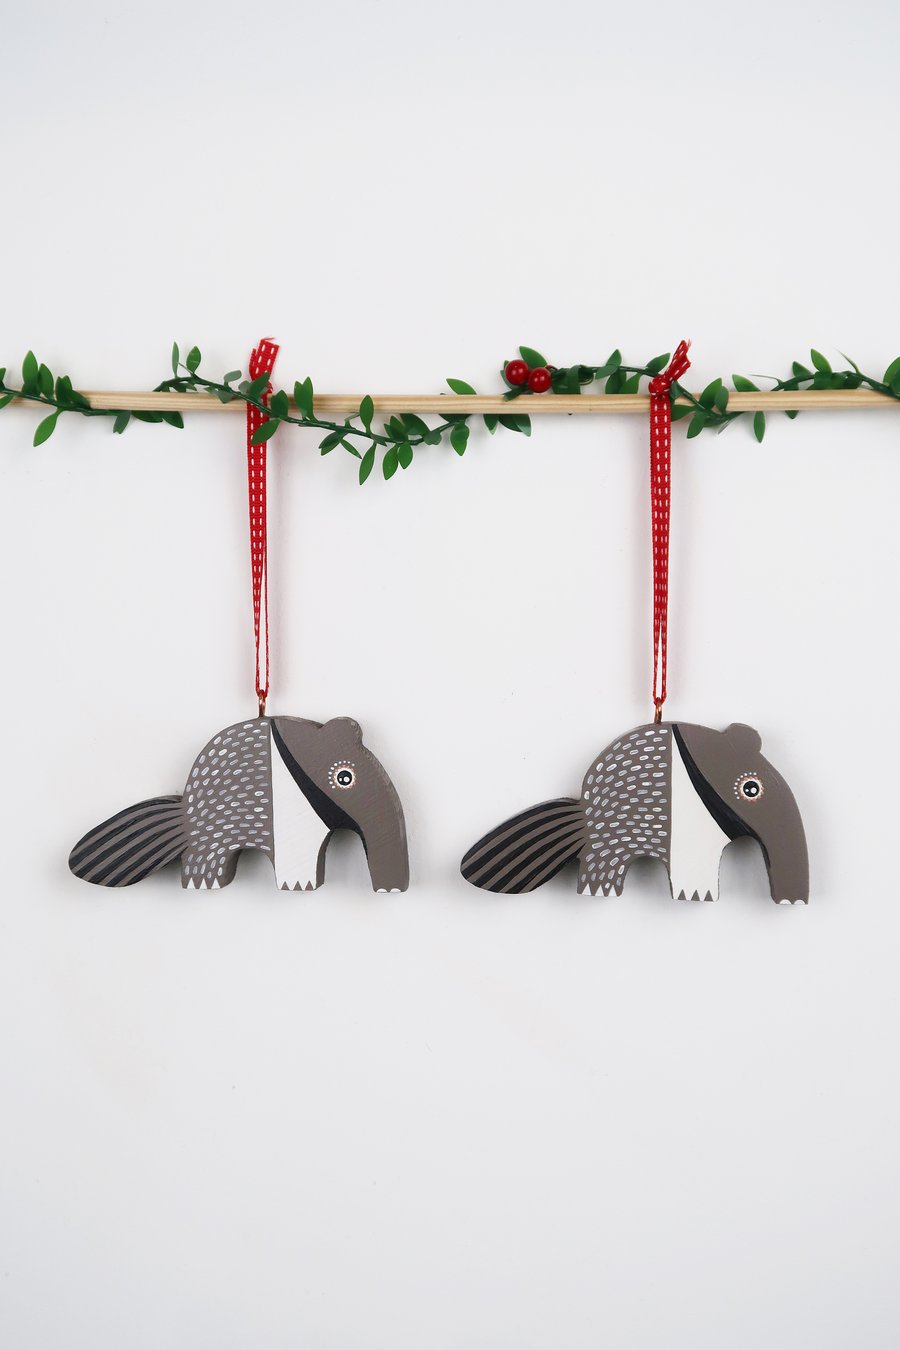 anteater christmas tree hanging decoration, set of 2 cute stocking fillers